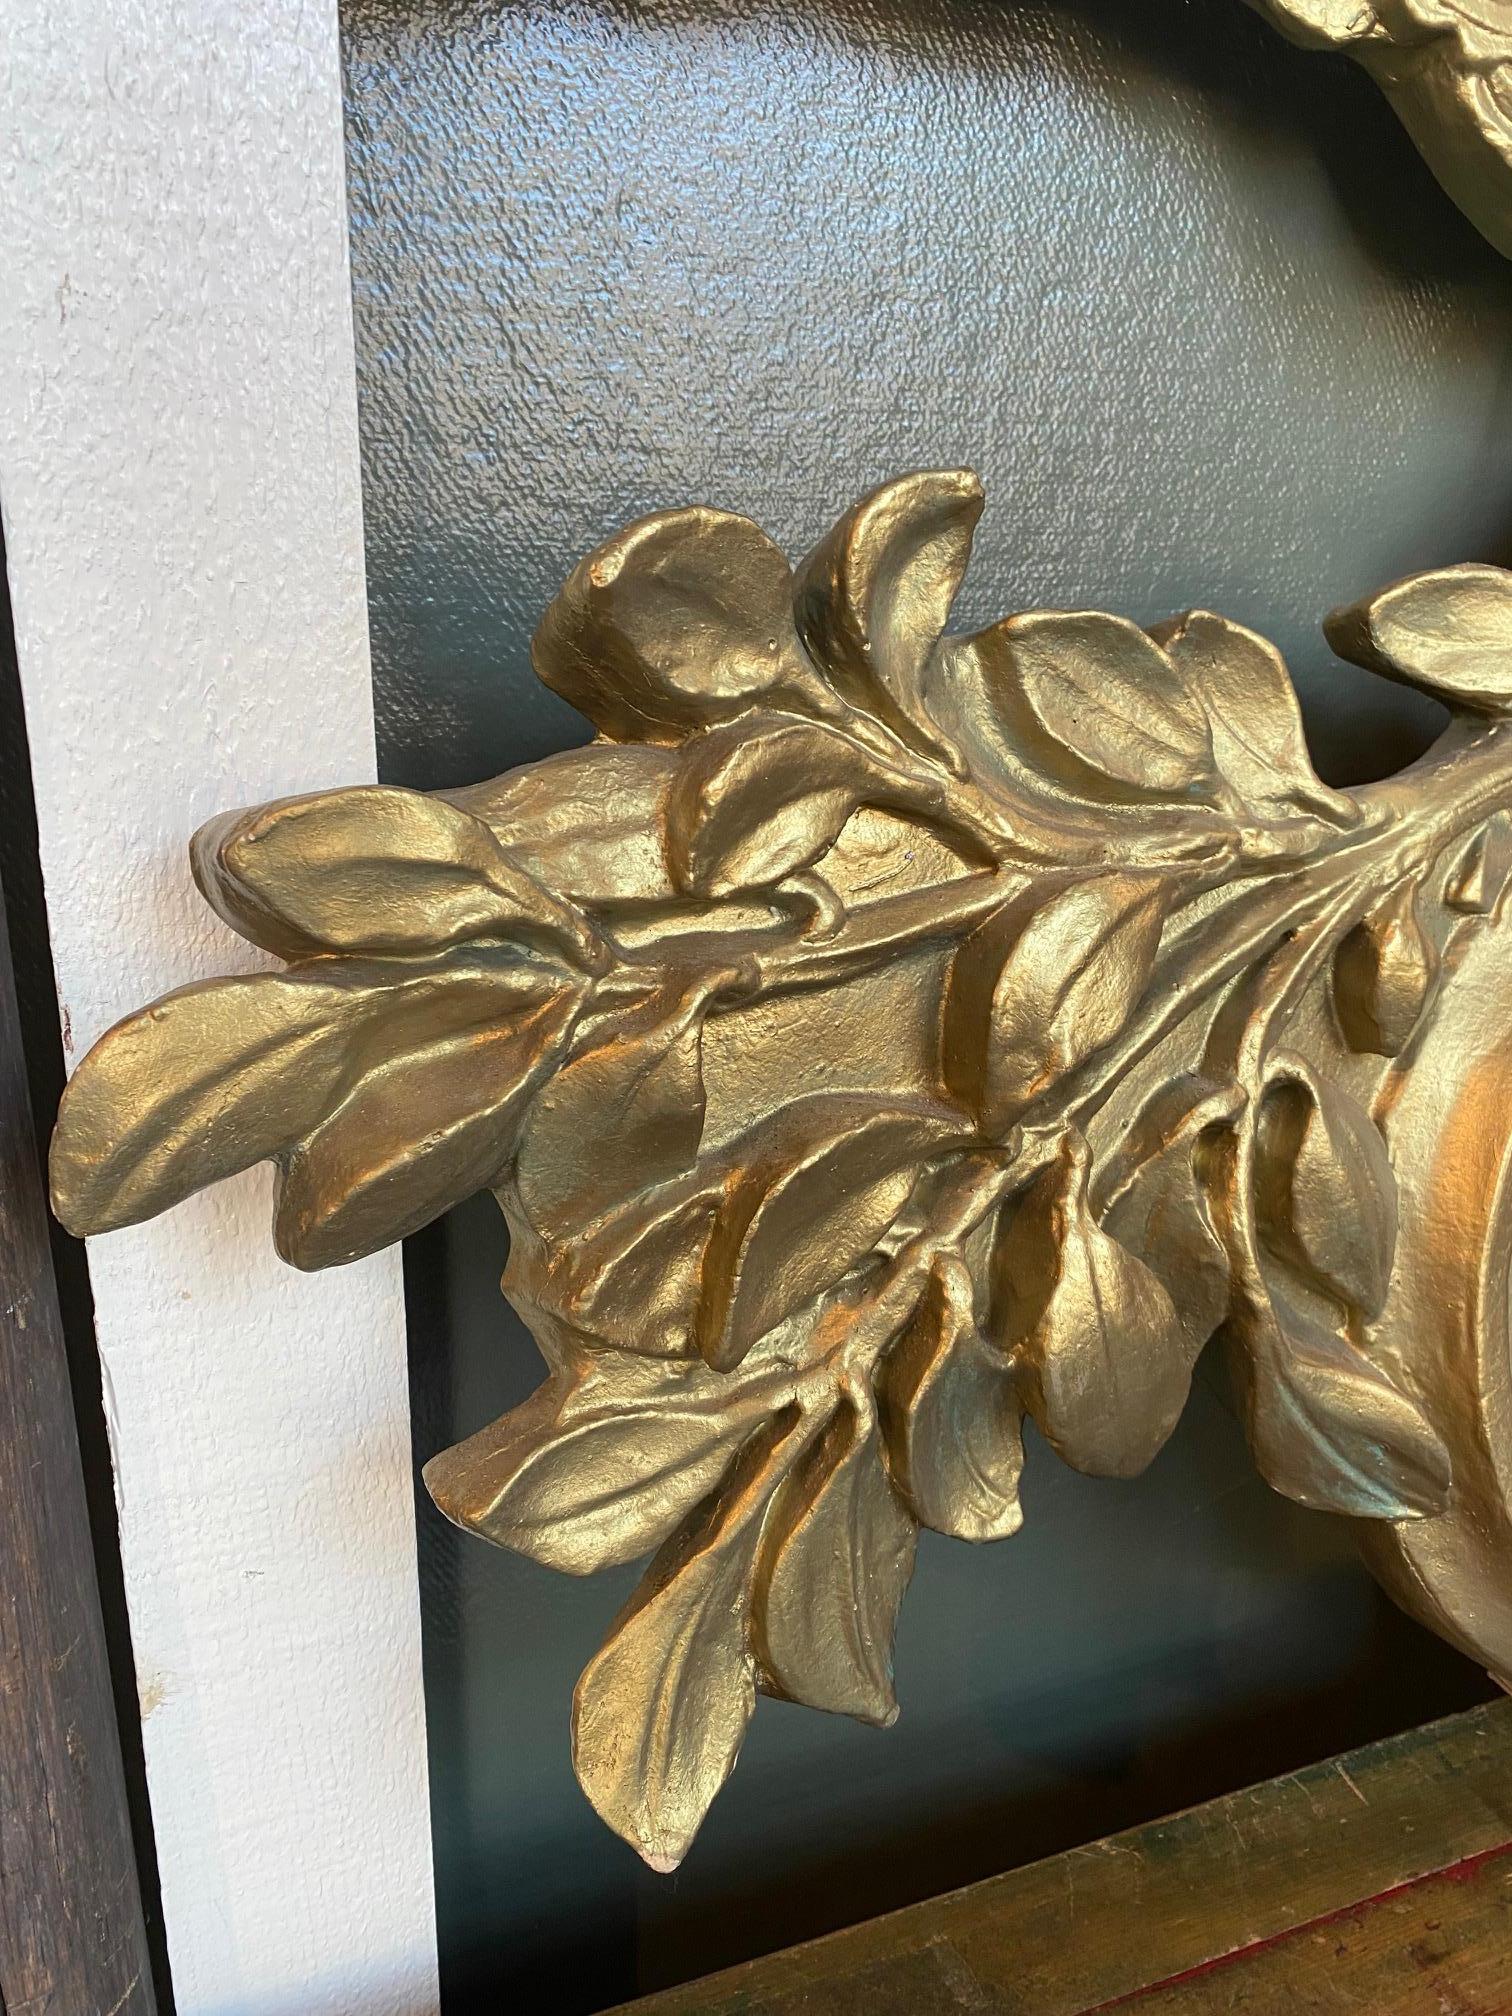 Cast and Gilded Patriotic Eagle with Clipper Ship Plaque, with a Clutch of Arrows and an Olive Branch in it's Talons, mid 20th Century, from a Boston Bank associated with the historic State Street Trust Bank. The Bellamy type spread-wing eagle holds